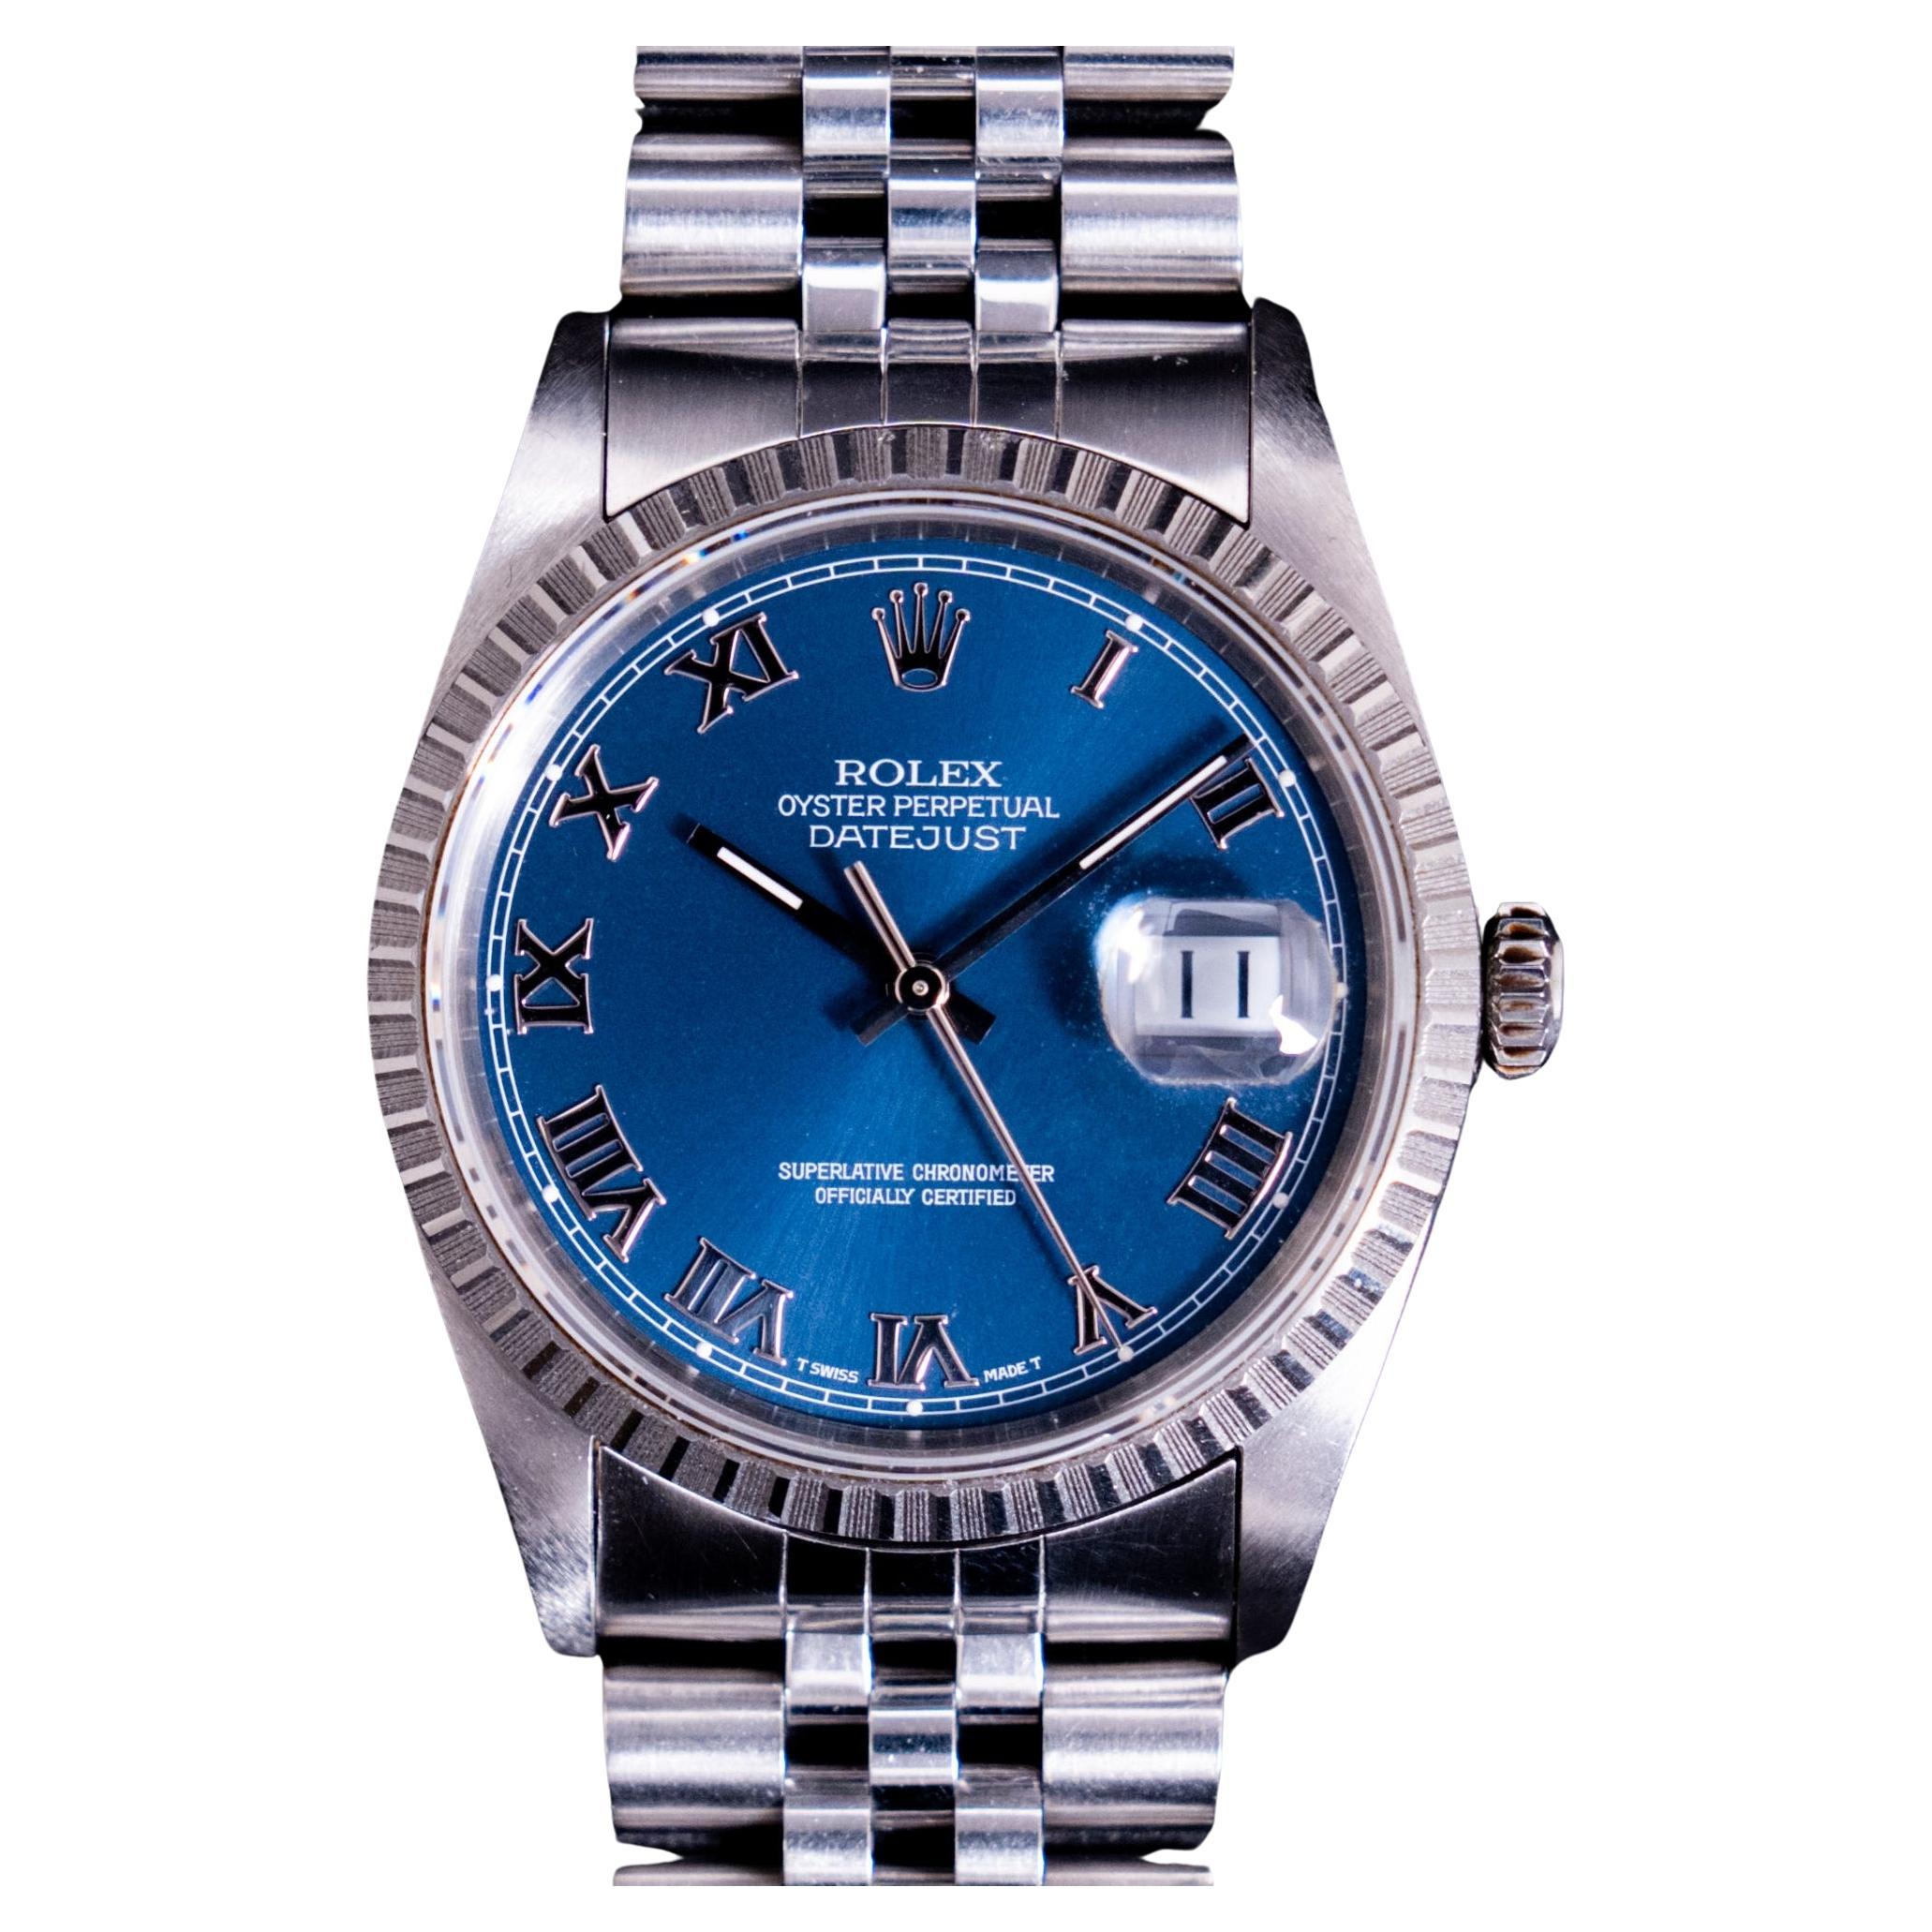 Rolex Steel Oyster Perpetual Datejust Blue Roman Dial 16220 Watch w/ Paper, 1993 For Sale